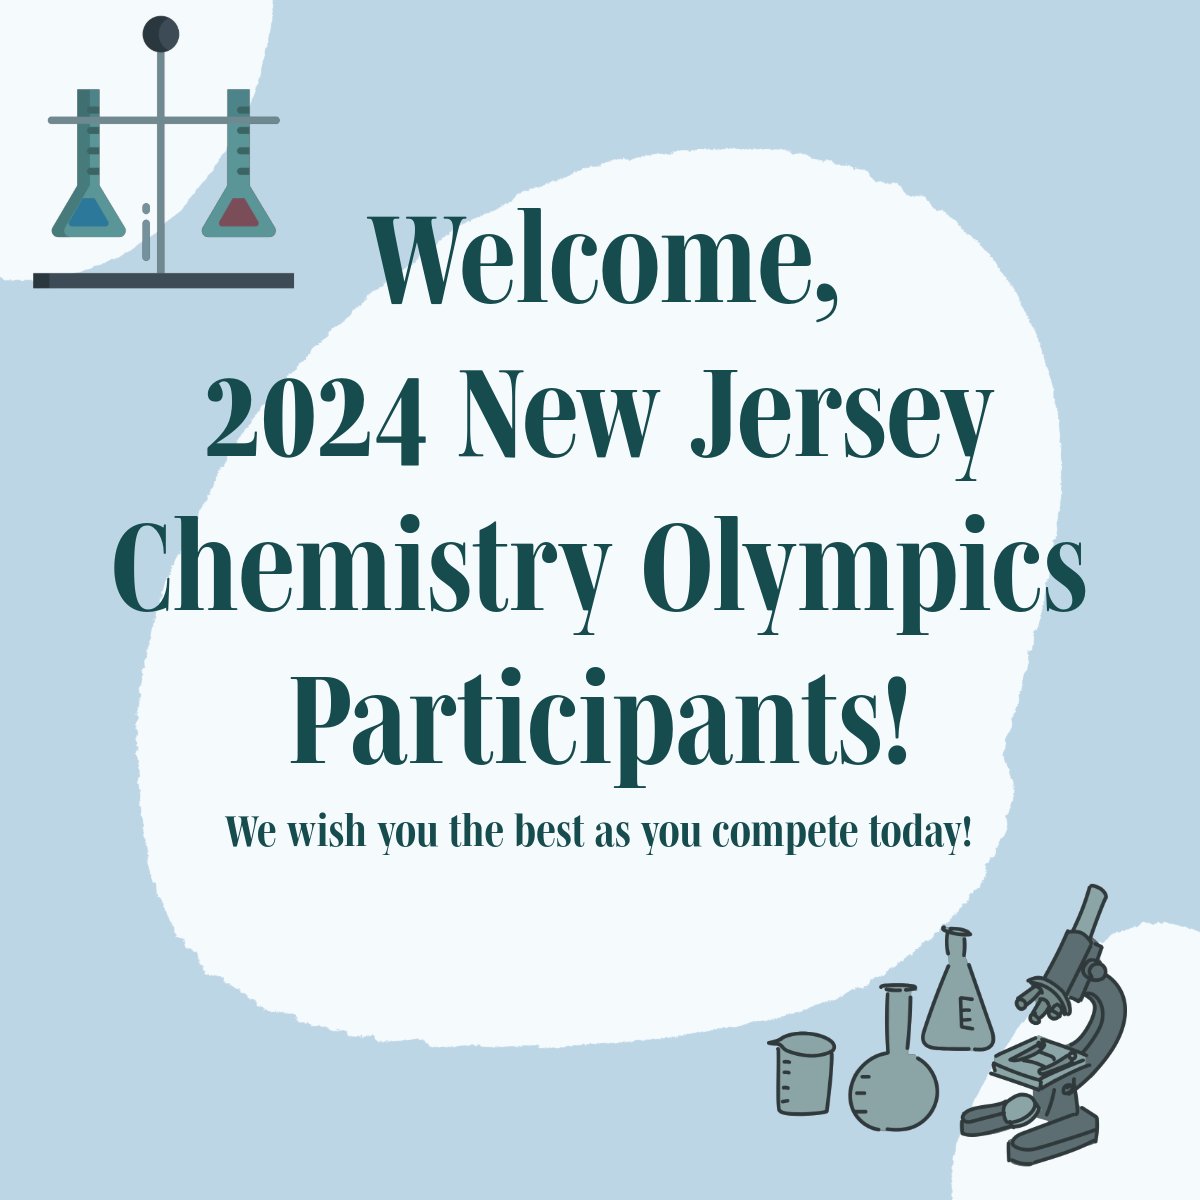 We wish the very best to the high school students on campus competing in the 2024 New Jersey Chemistry Olympics today hosted here at @njit! We're glad you're on our campus!

#njit #njitlibrary #chemistryolympics